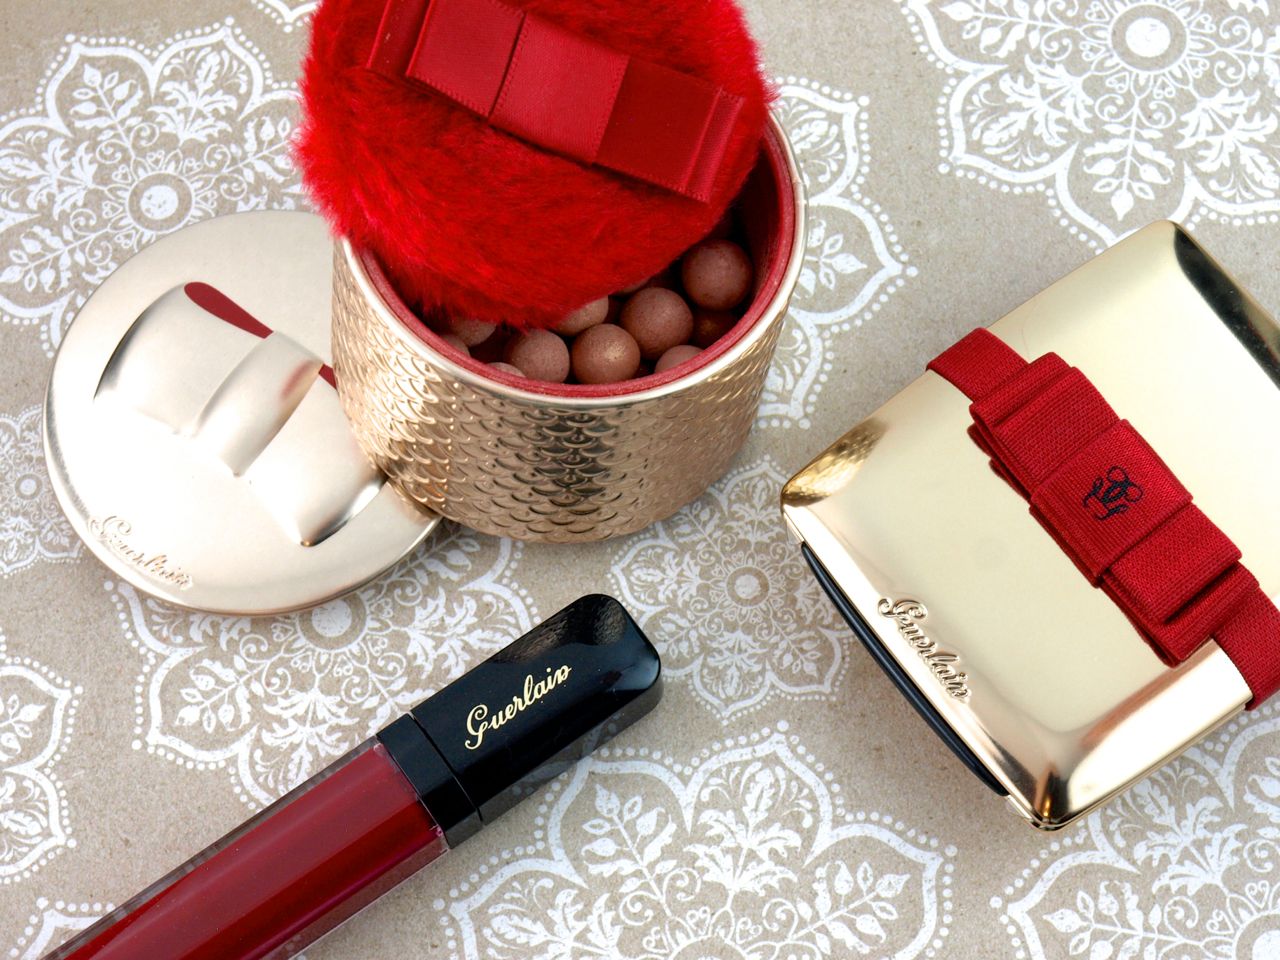 Guerlain Christmas Color Collection 2014: Review and Swatches